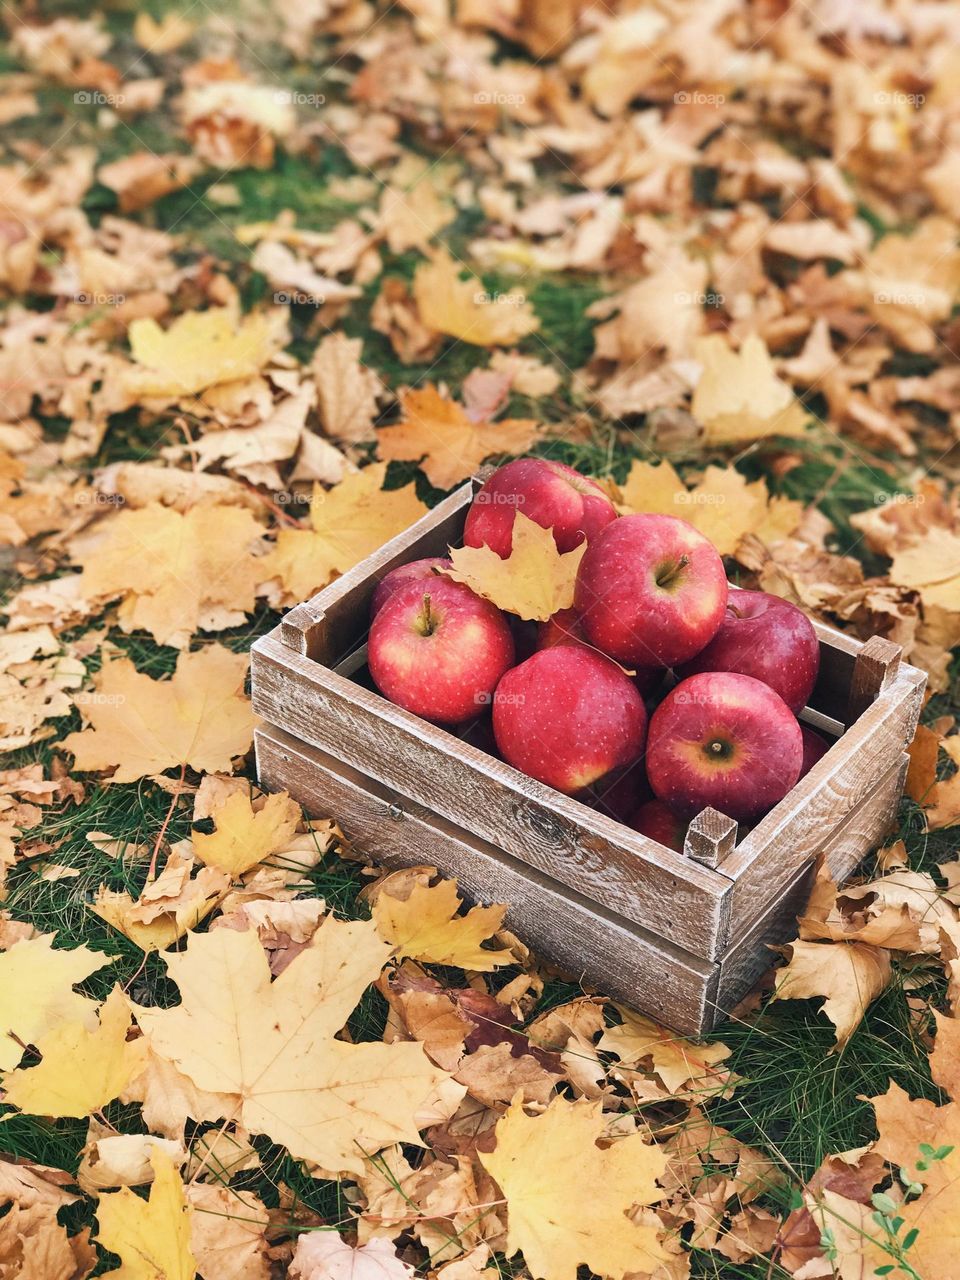 Autumn Apple with leaves